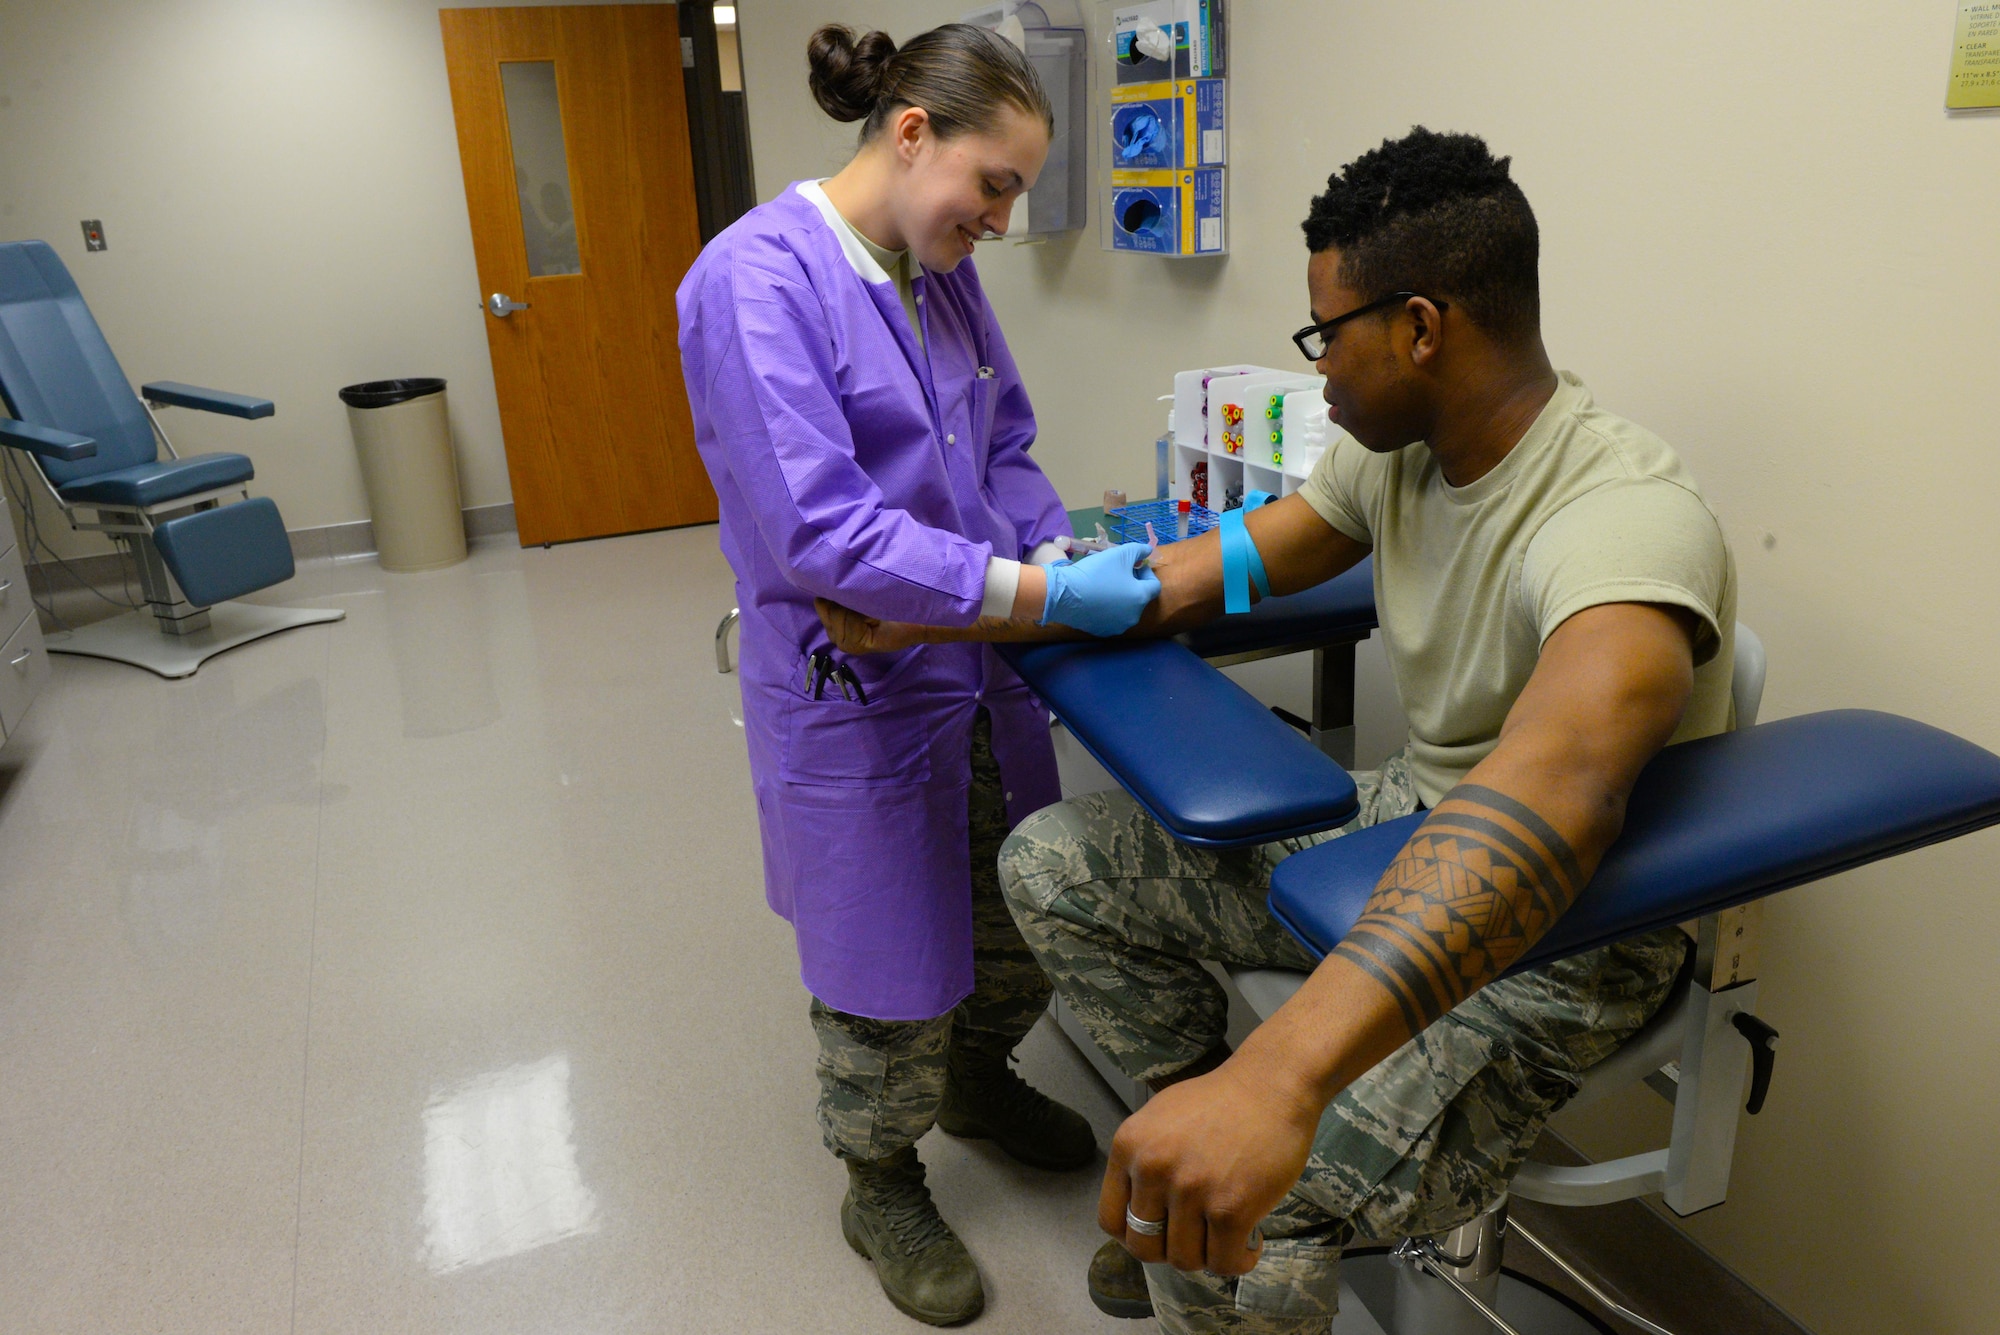 Airman 1st Class Kristen Lowder, a medical laboratory technician assigned to the 28th Medical Support Squadron, takes a blood sample from Airman 1st Class Von Black, a food services apprentice assigned to the 28th Force Support Squadron, inside the medical laboratory at Ellsworth Air Force Base, S.D., April 24, 2017. Lowder is the project officer for the 28th Medical Group bone marrow donation week. (U.S. Air Force photo by Airman Nicolas Z. Erwin)